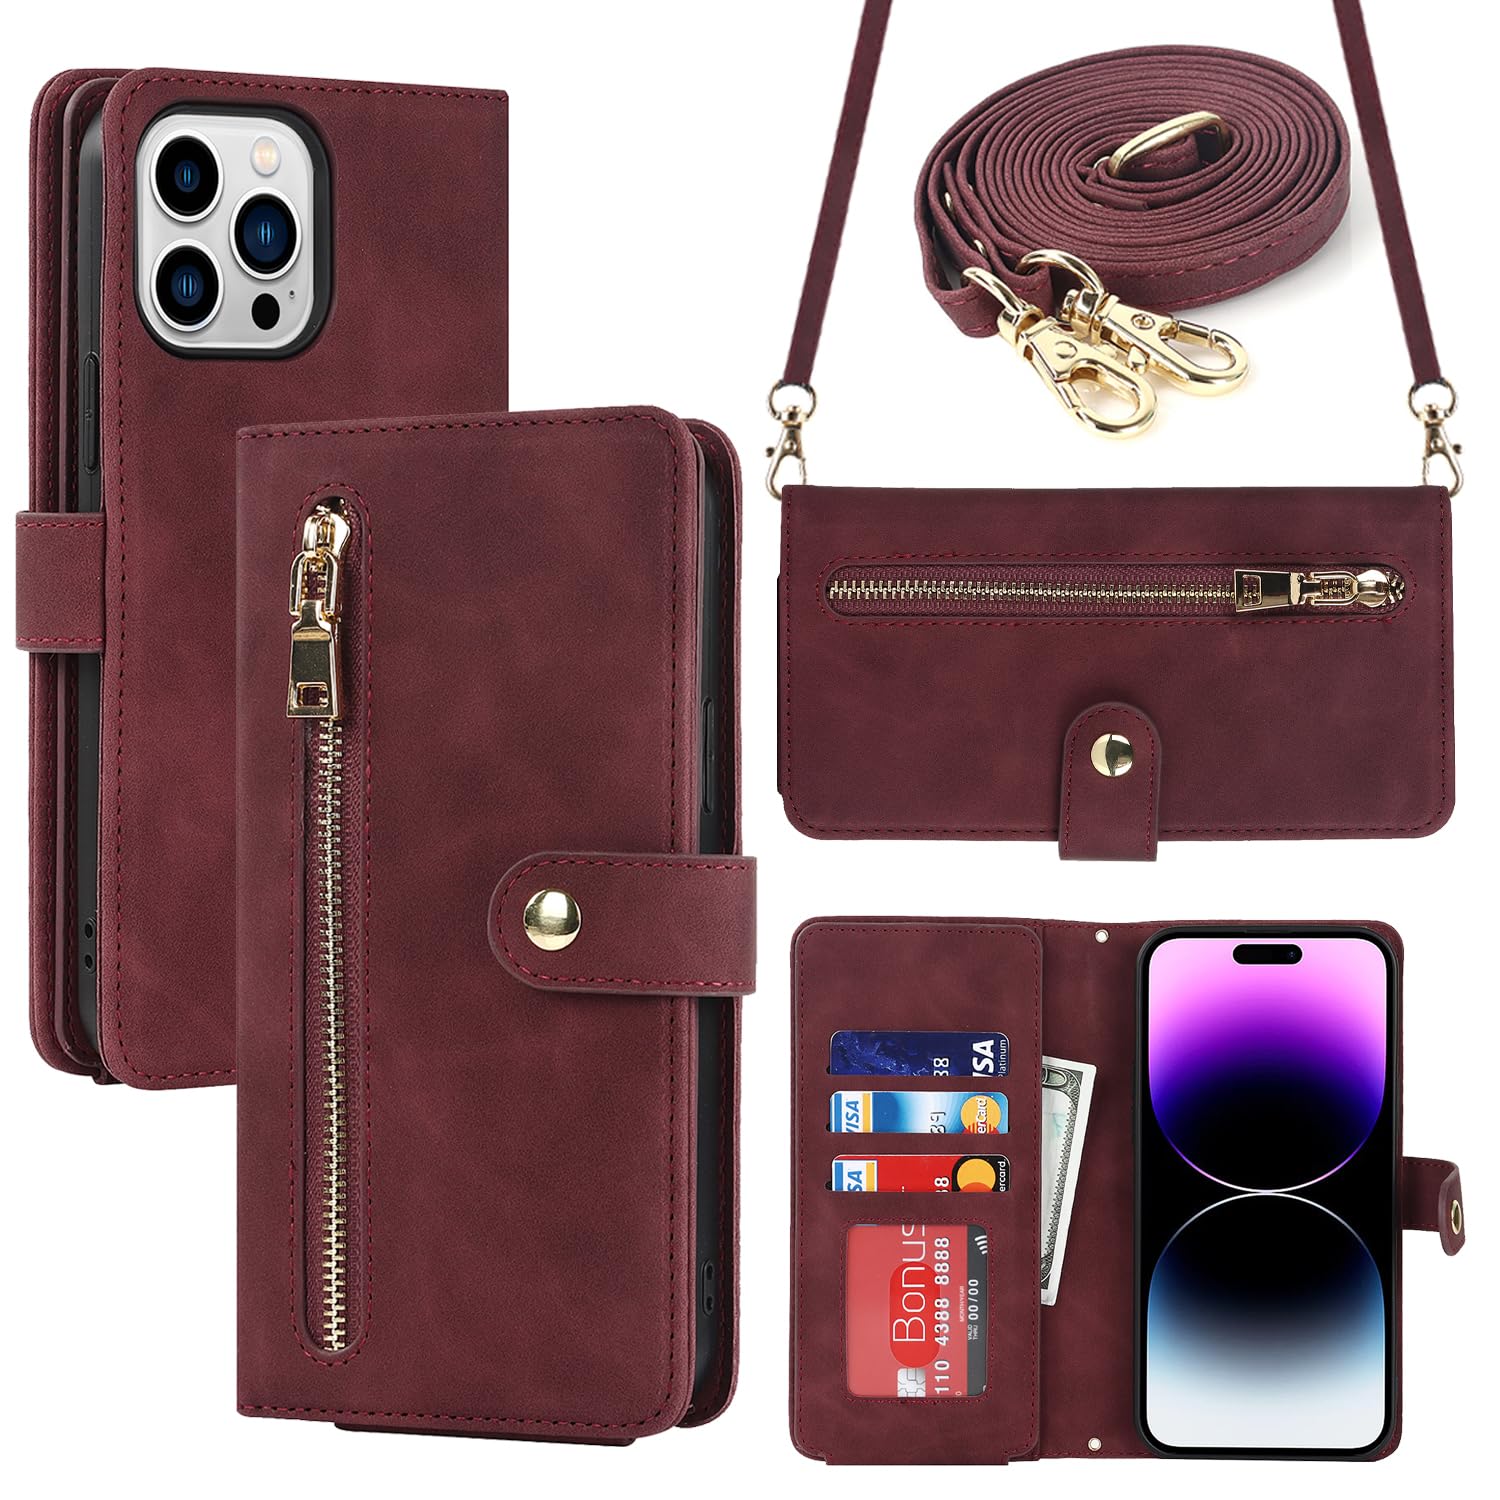 Ｈａｖａｙａ Crossbody Phone case for iPhone 15 pro max case with Strap for Women iPhone 15 pro max Wallet case with Card Holder Flip Leather Zipper Wallet Cover with Credit Card Slot-Red Wine